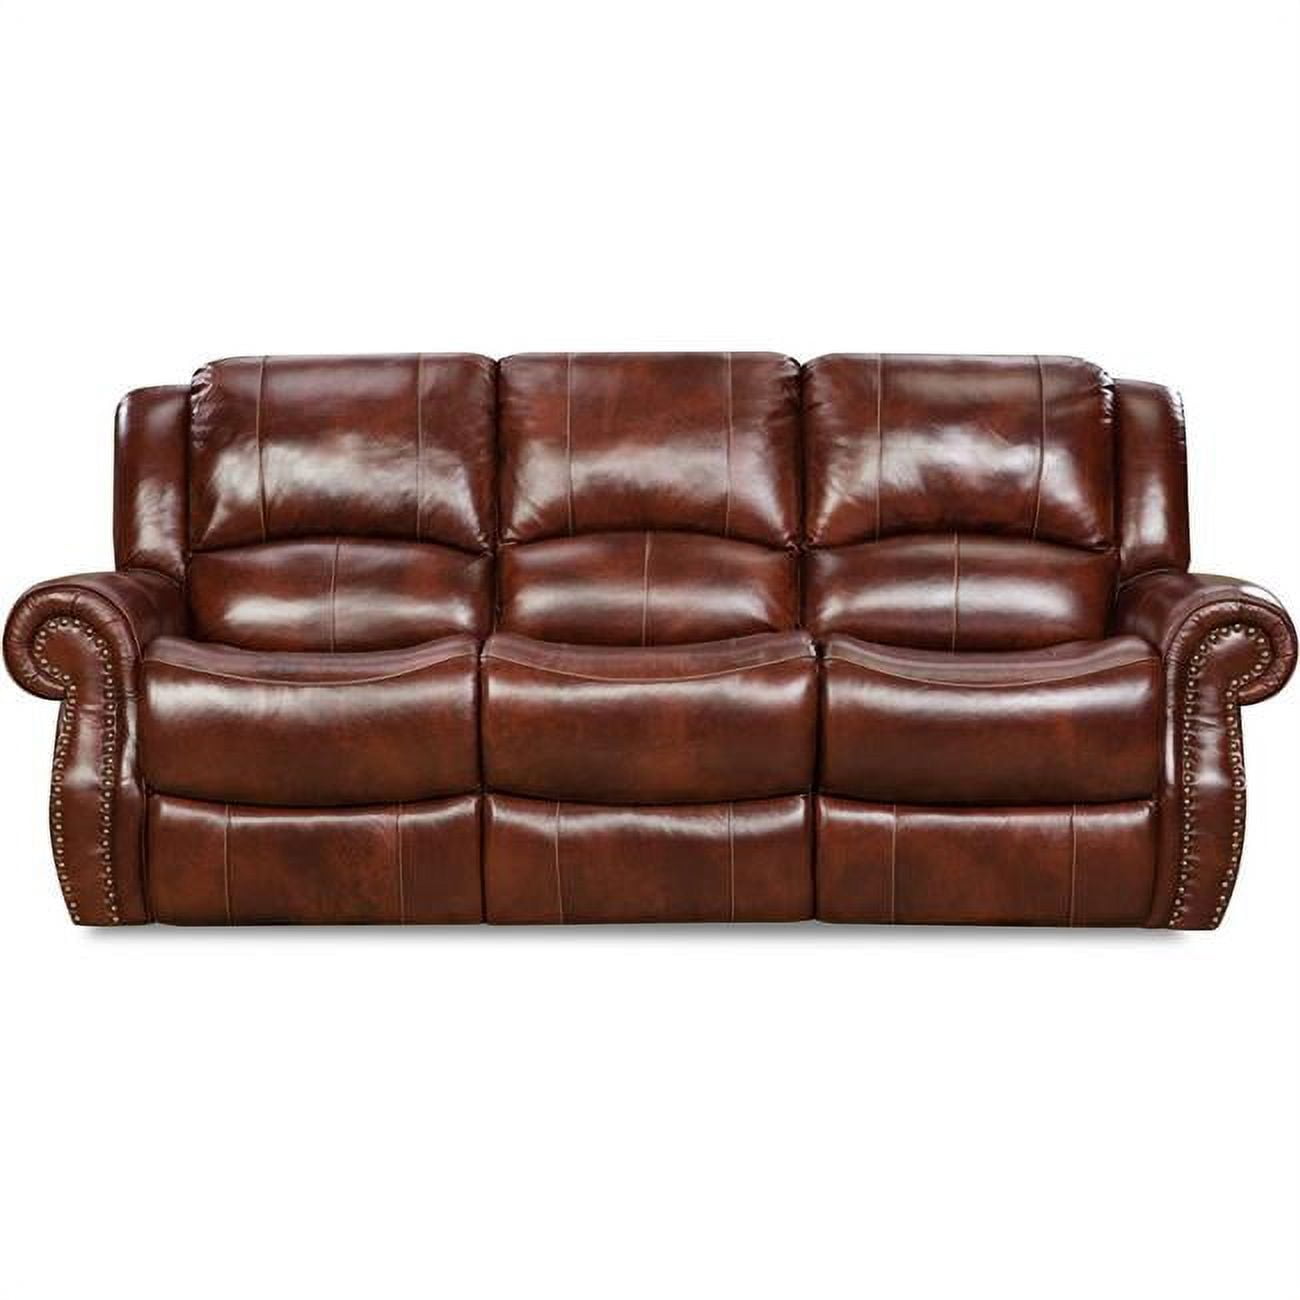 Leather Double Reclining Sofa Oxblood